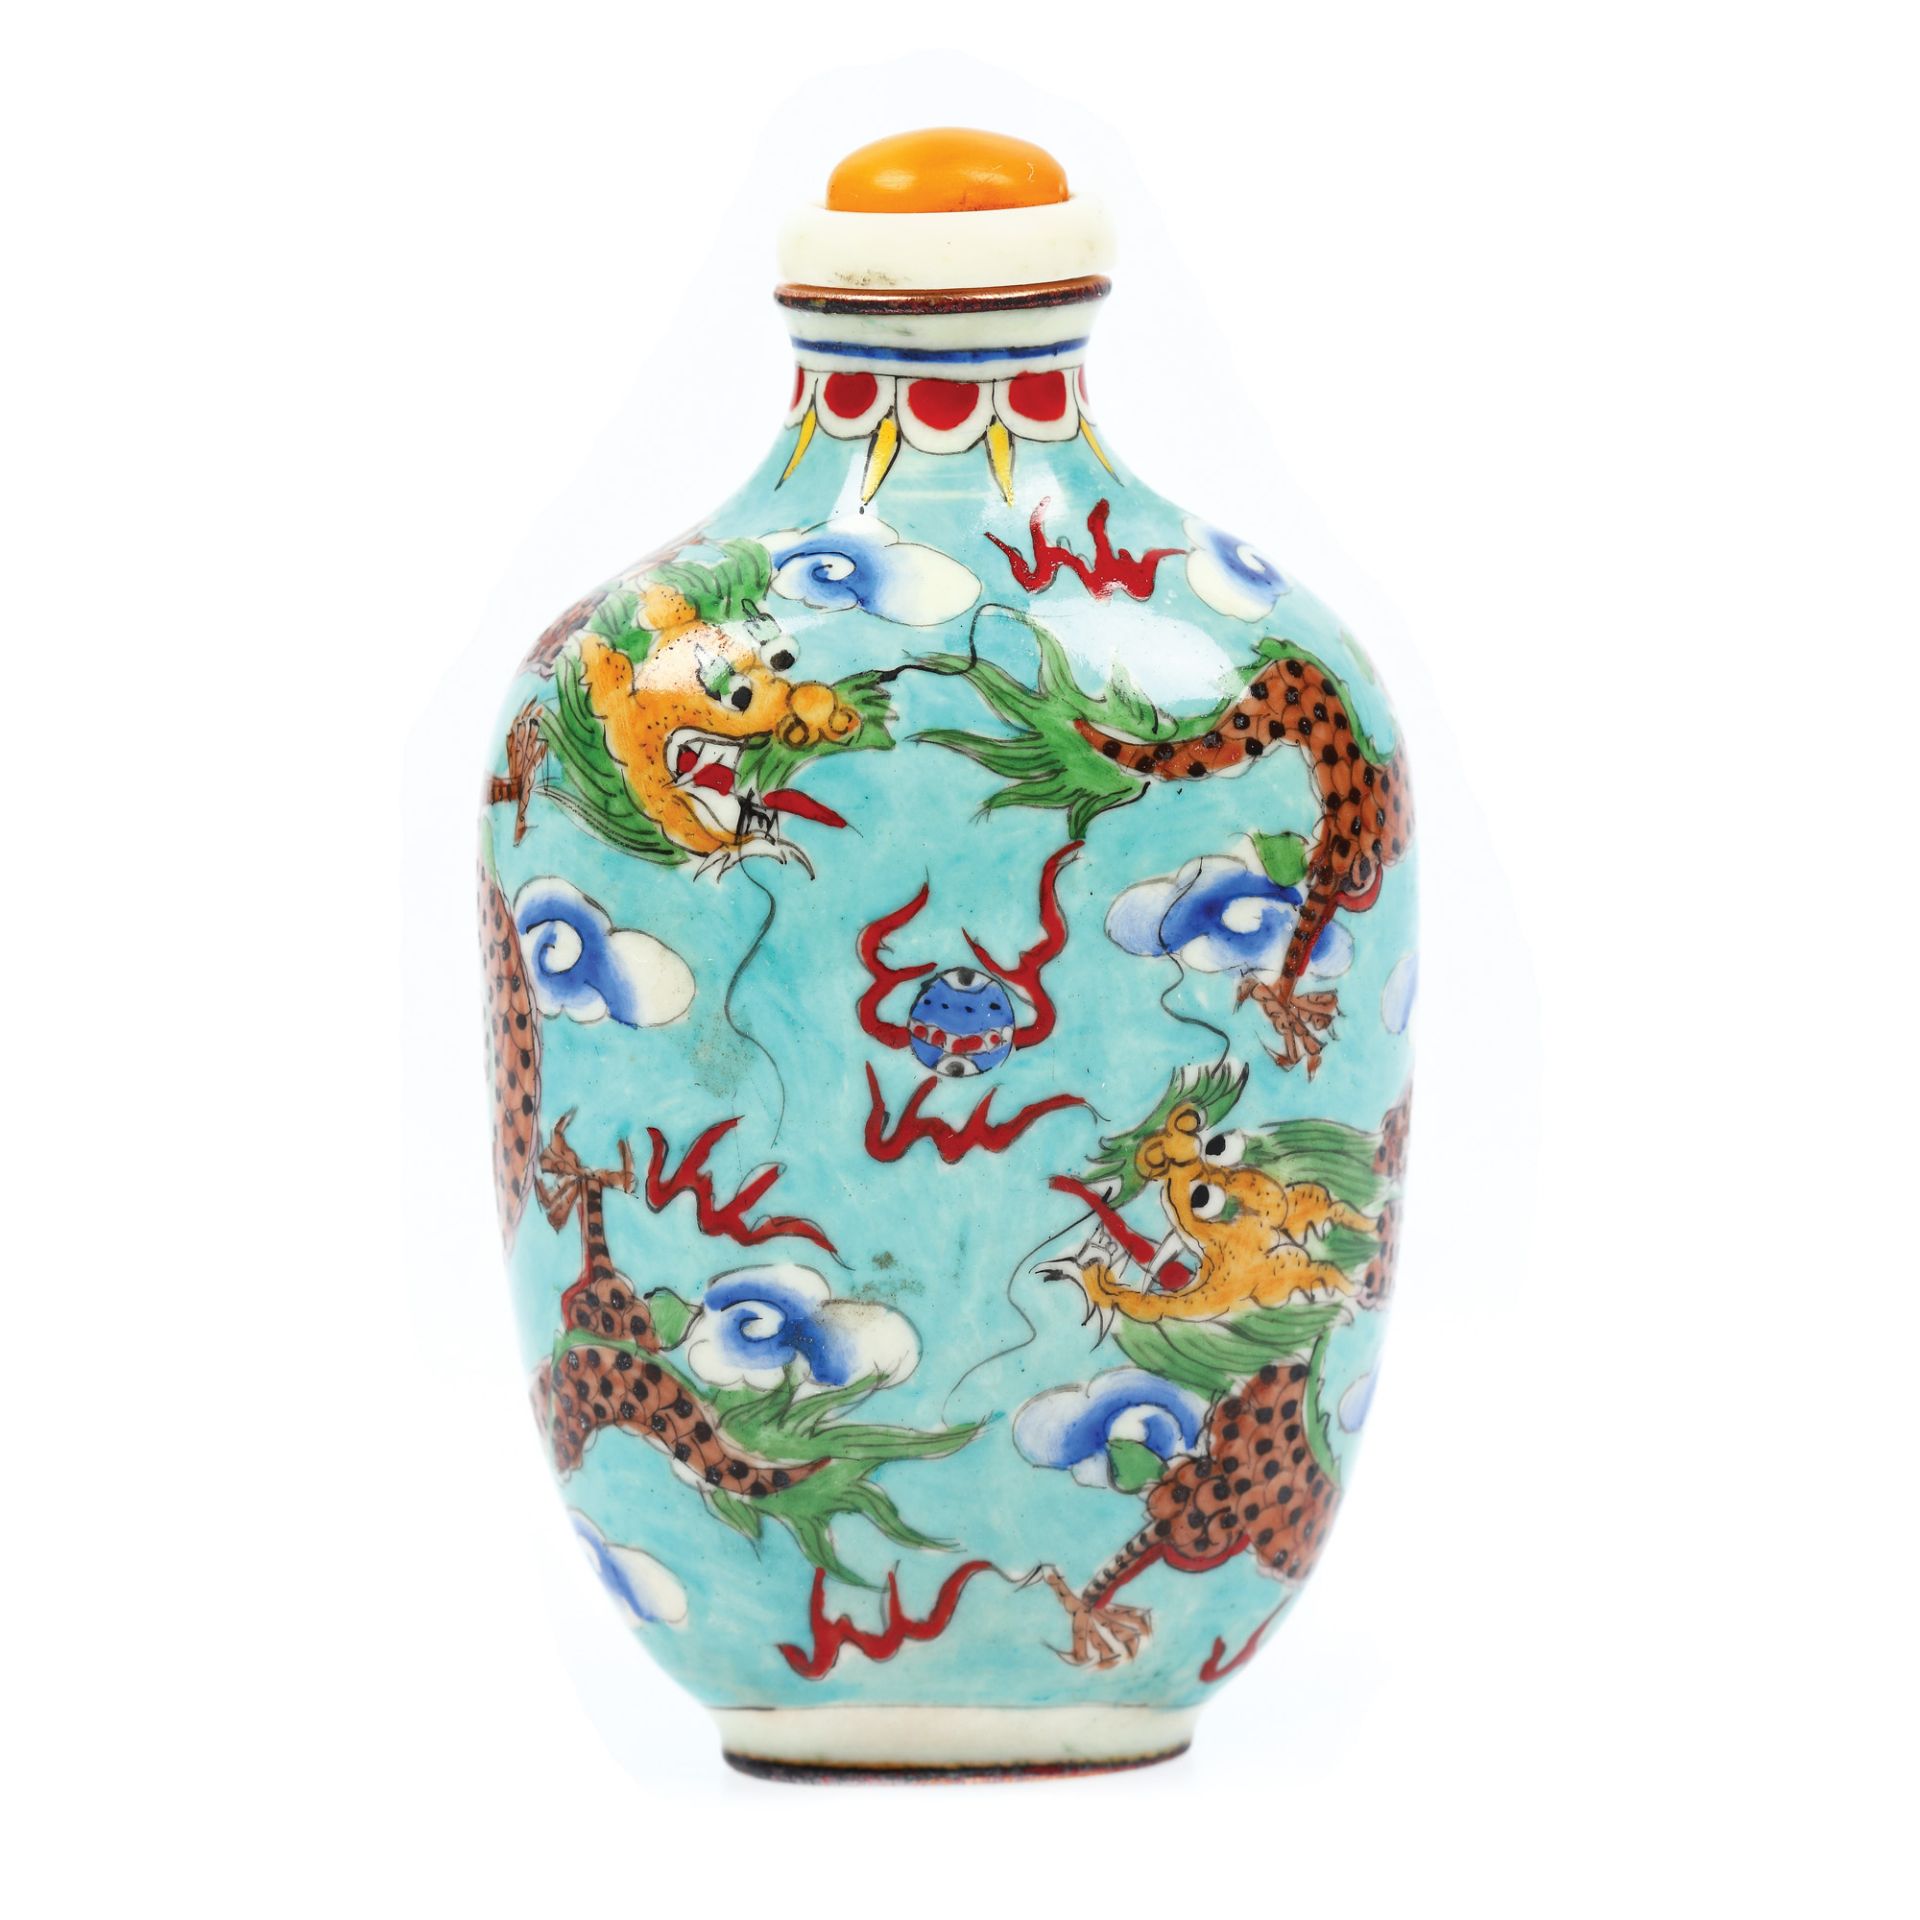 Recipient for sniffing, Beijing enamel, ivory and amber stopper, decorated with dragons hunting pear - Image 2 of 4